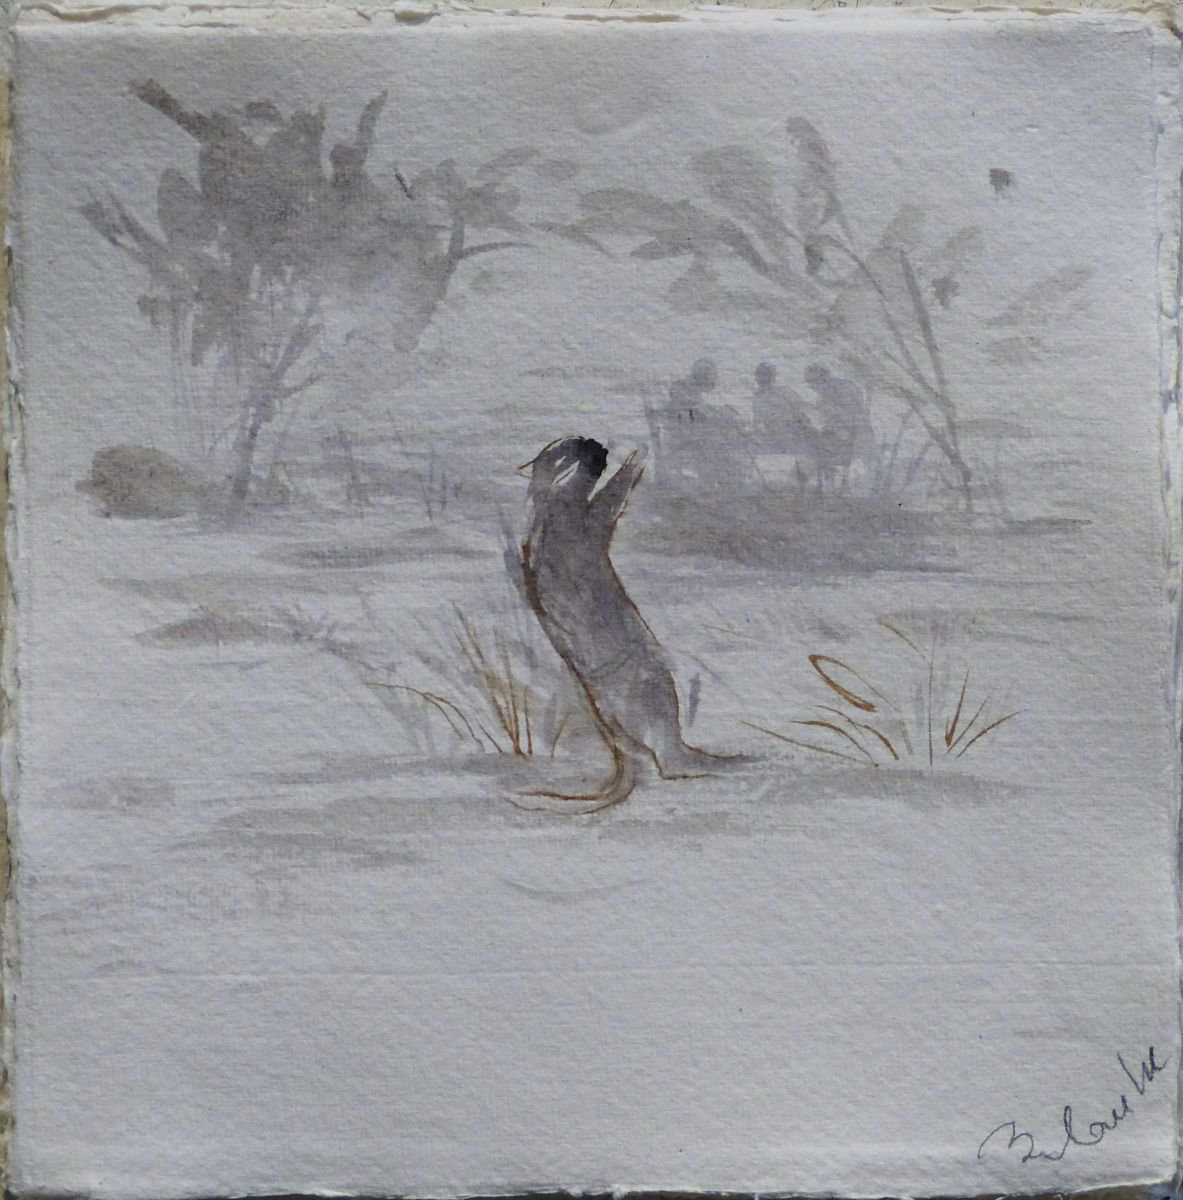 Cat on a ramble 2, 21x21 cm by Frederic Belaubre